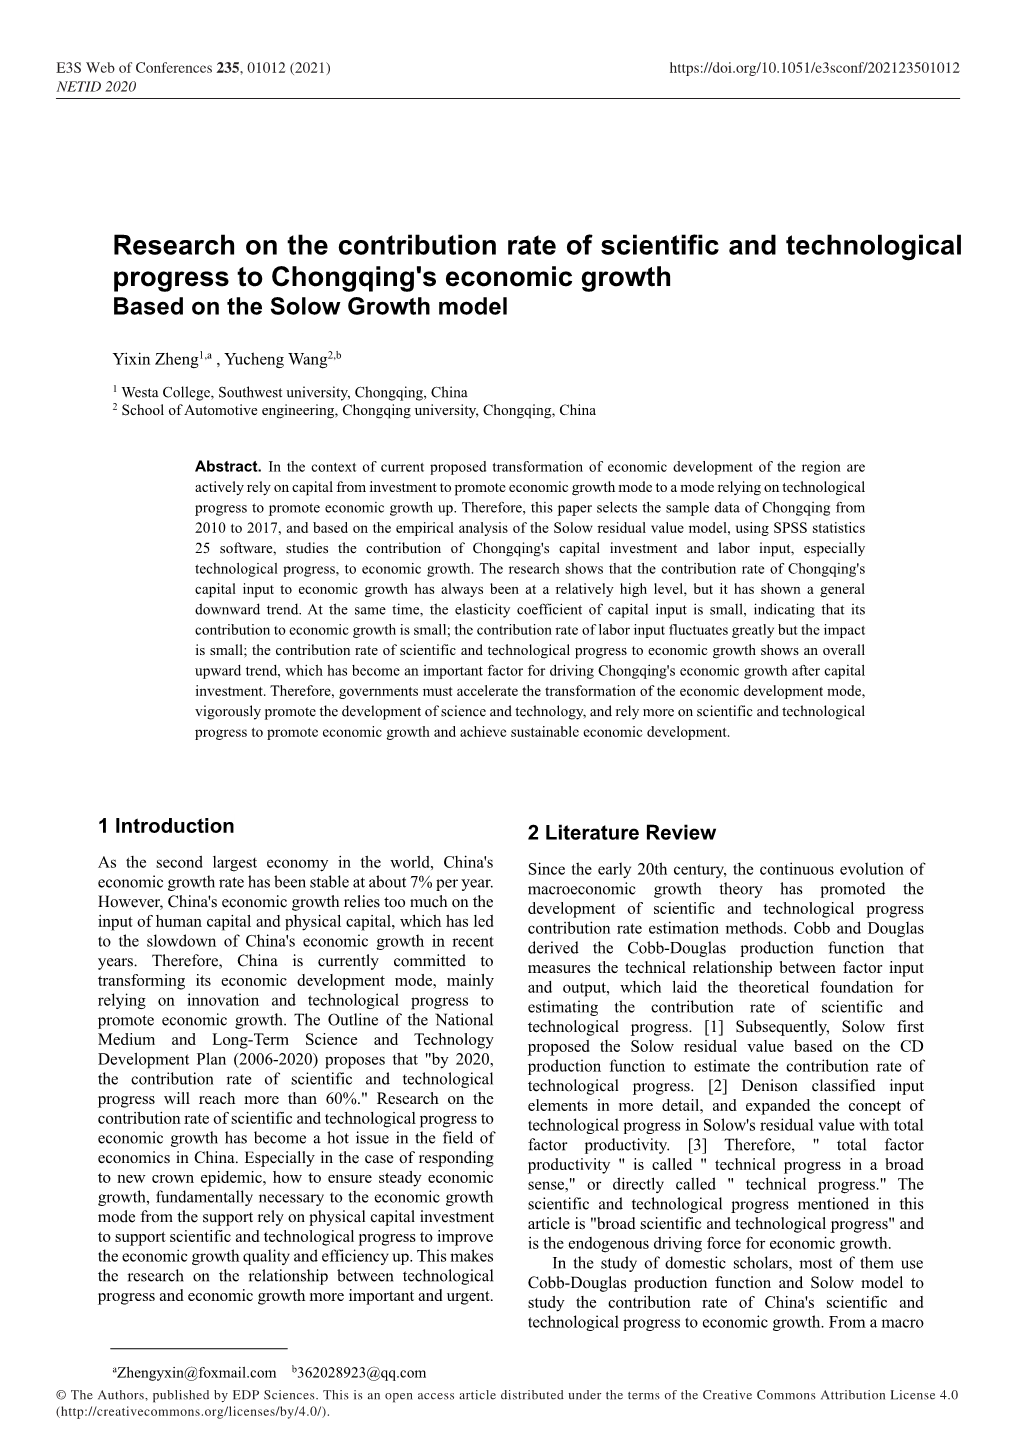 Research on the Contribution Rate of Scientific and Technological Progress to Chongqing's Economic Growth Based on the Solow Growth Model